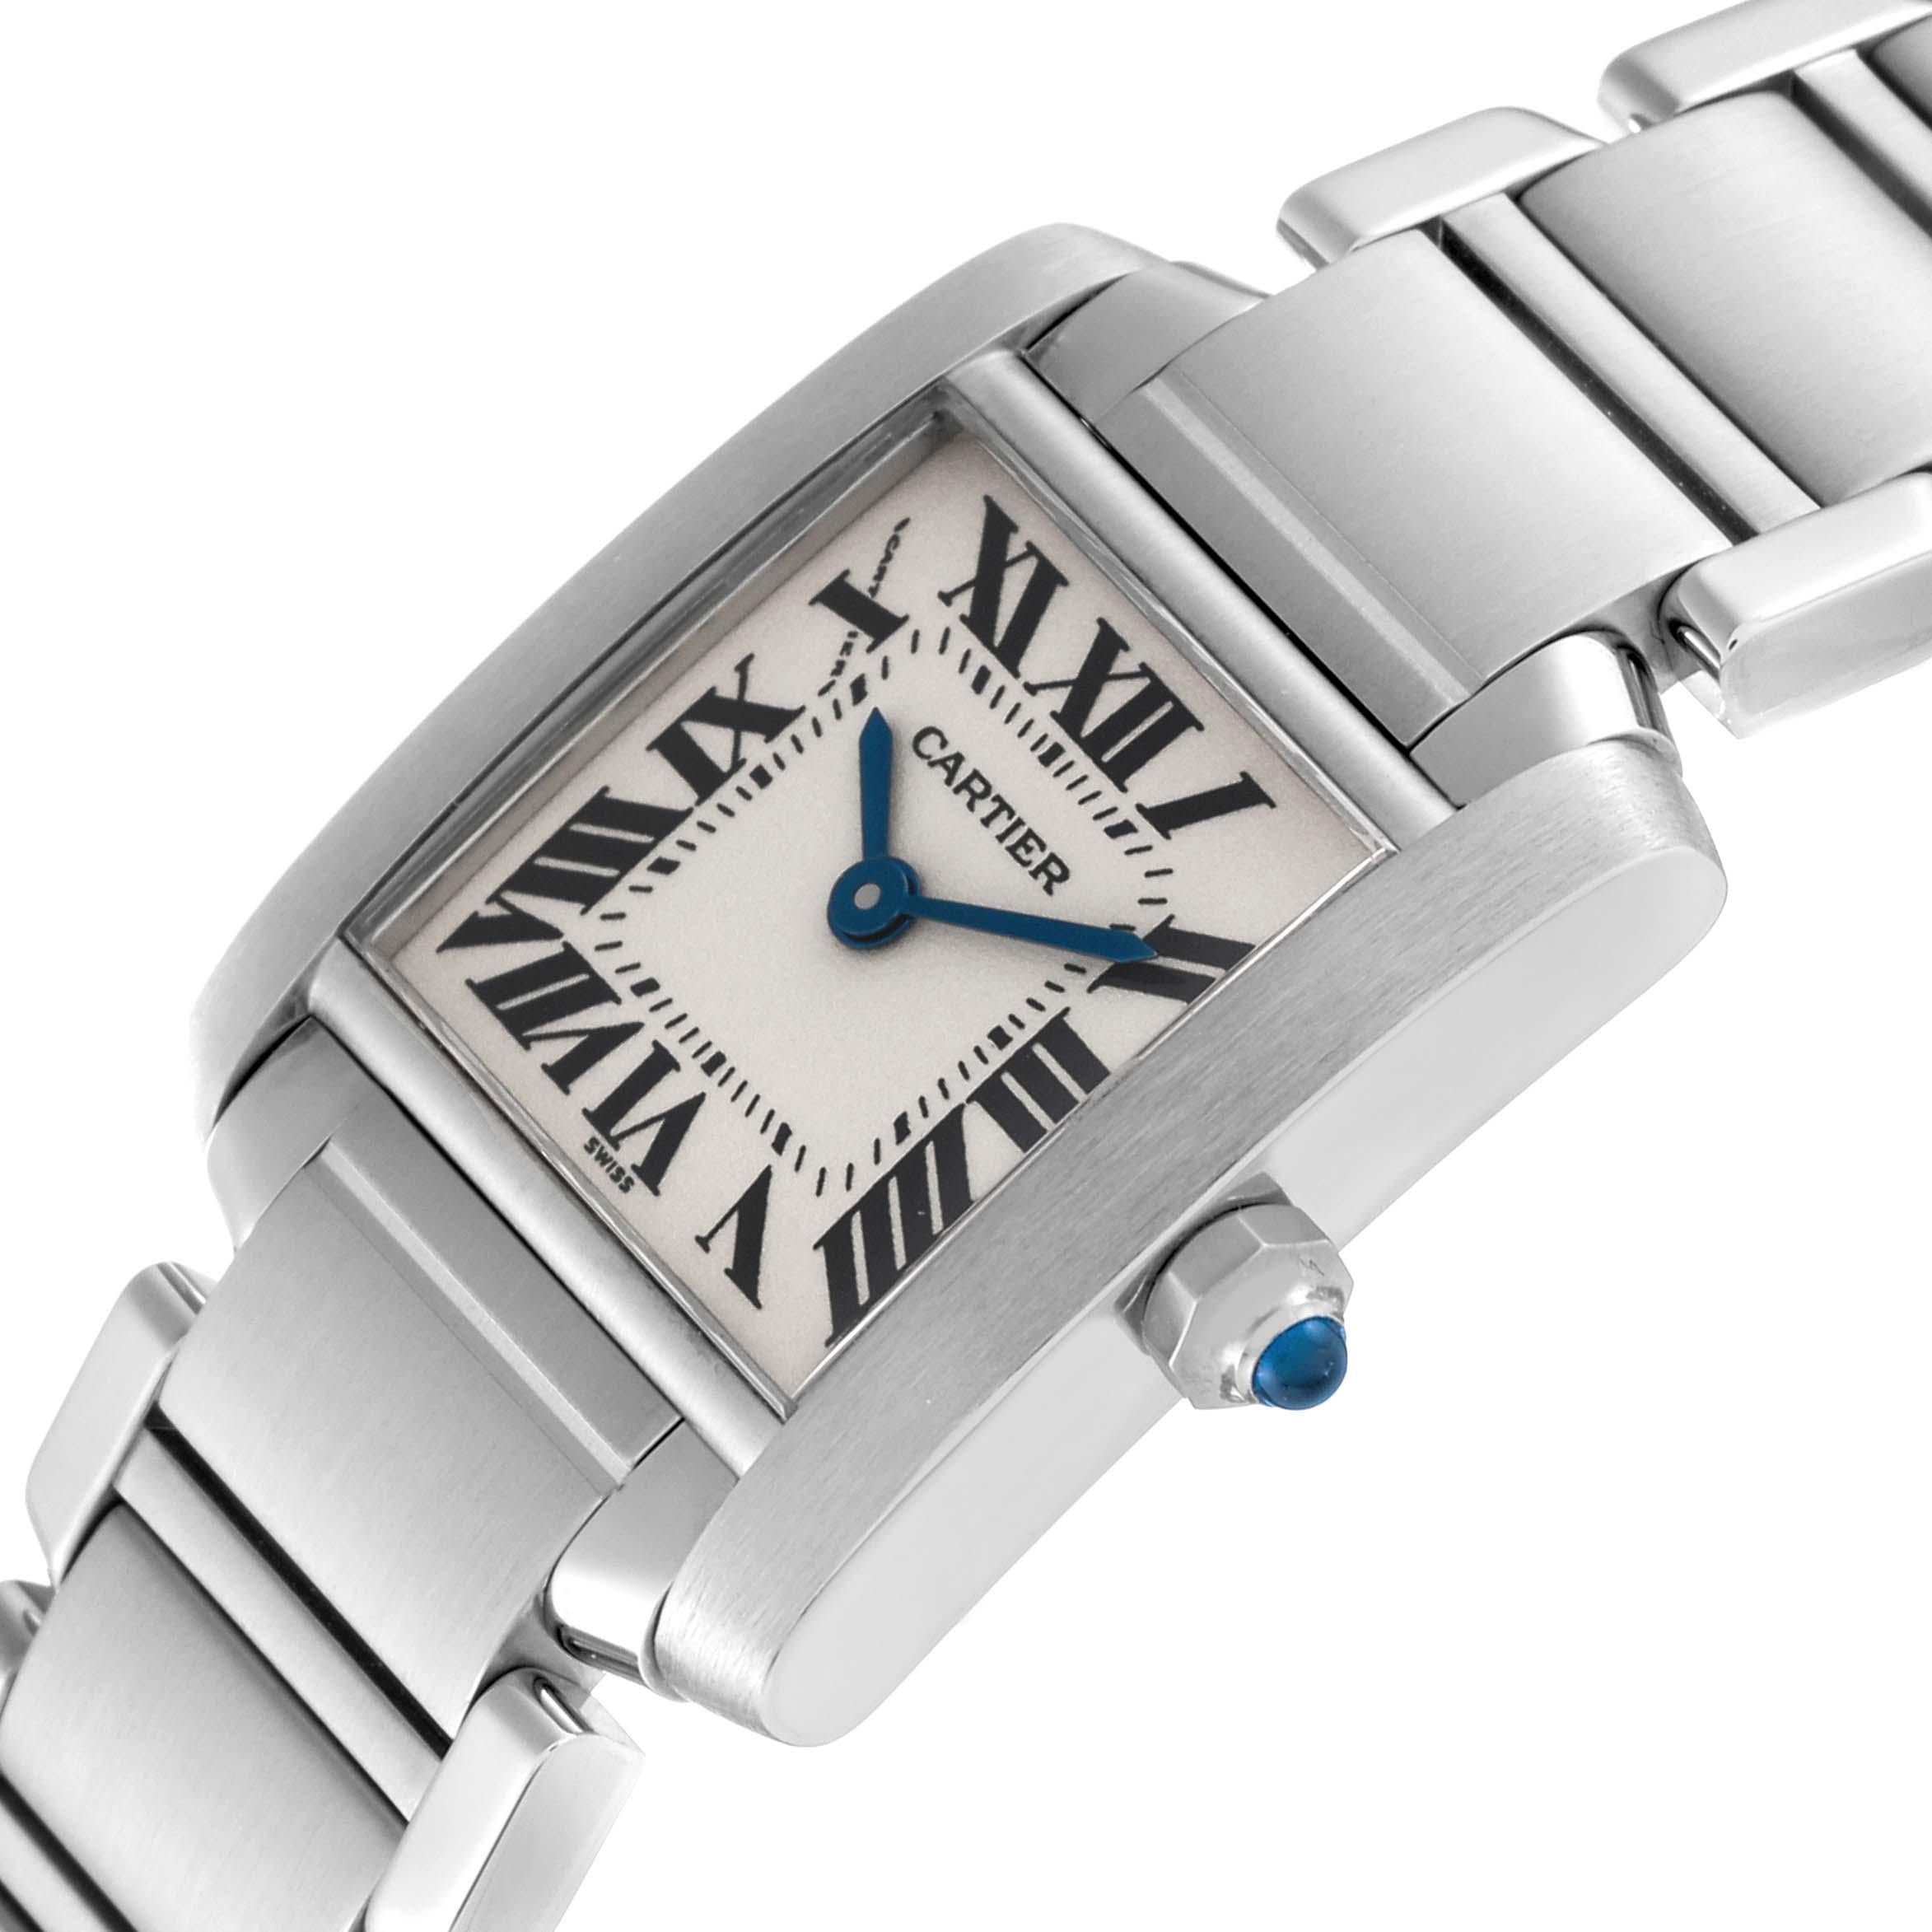 Cartier Tank Francaise Small Silver Dial Steel Ladies Watch W51008Q3 In Excellent Condition For Sale In Atlanta, GA